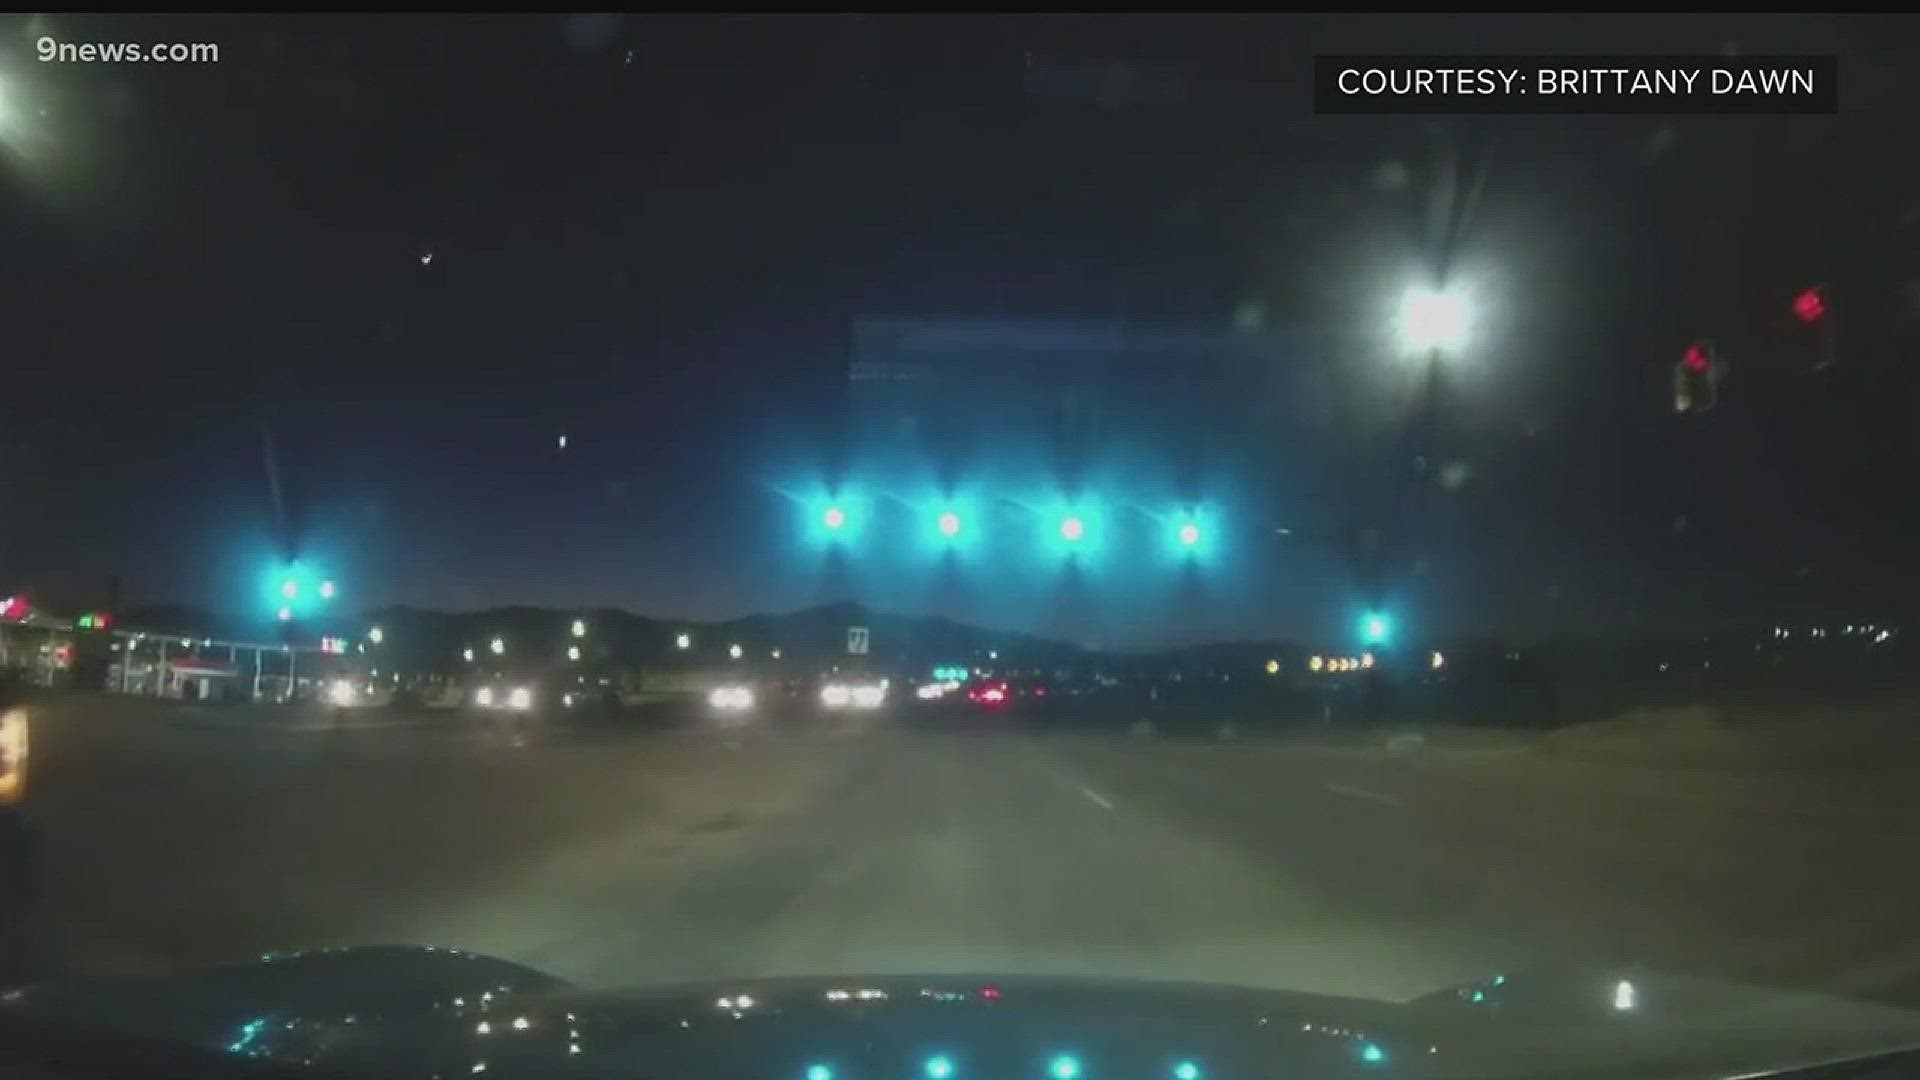 A video from Colorado Springs shows a 'fireball' streaking across the sky. This is one of thousands of bright meteors that enter the Earth's atmosphere every day.